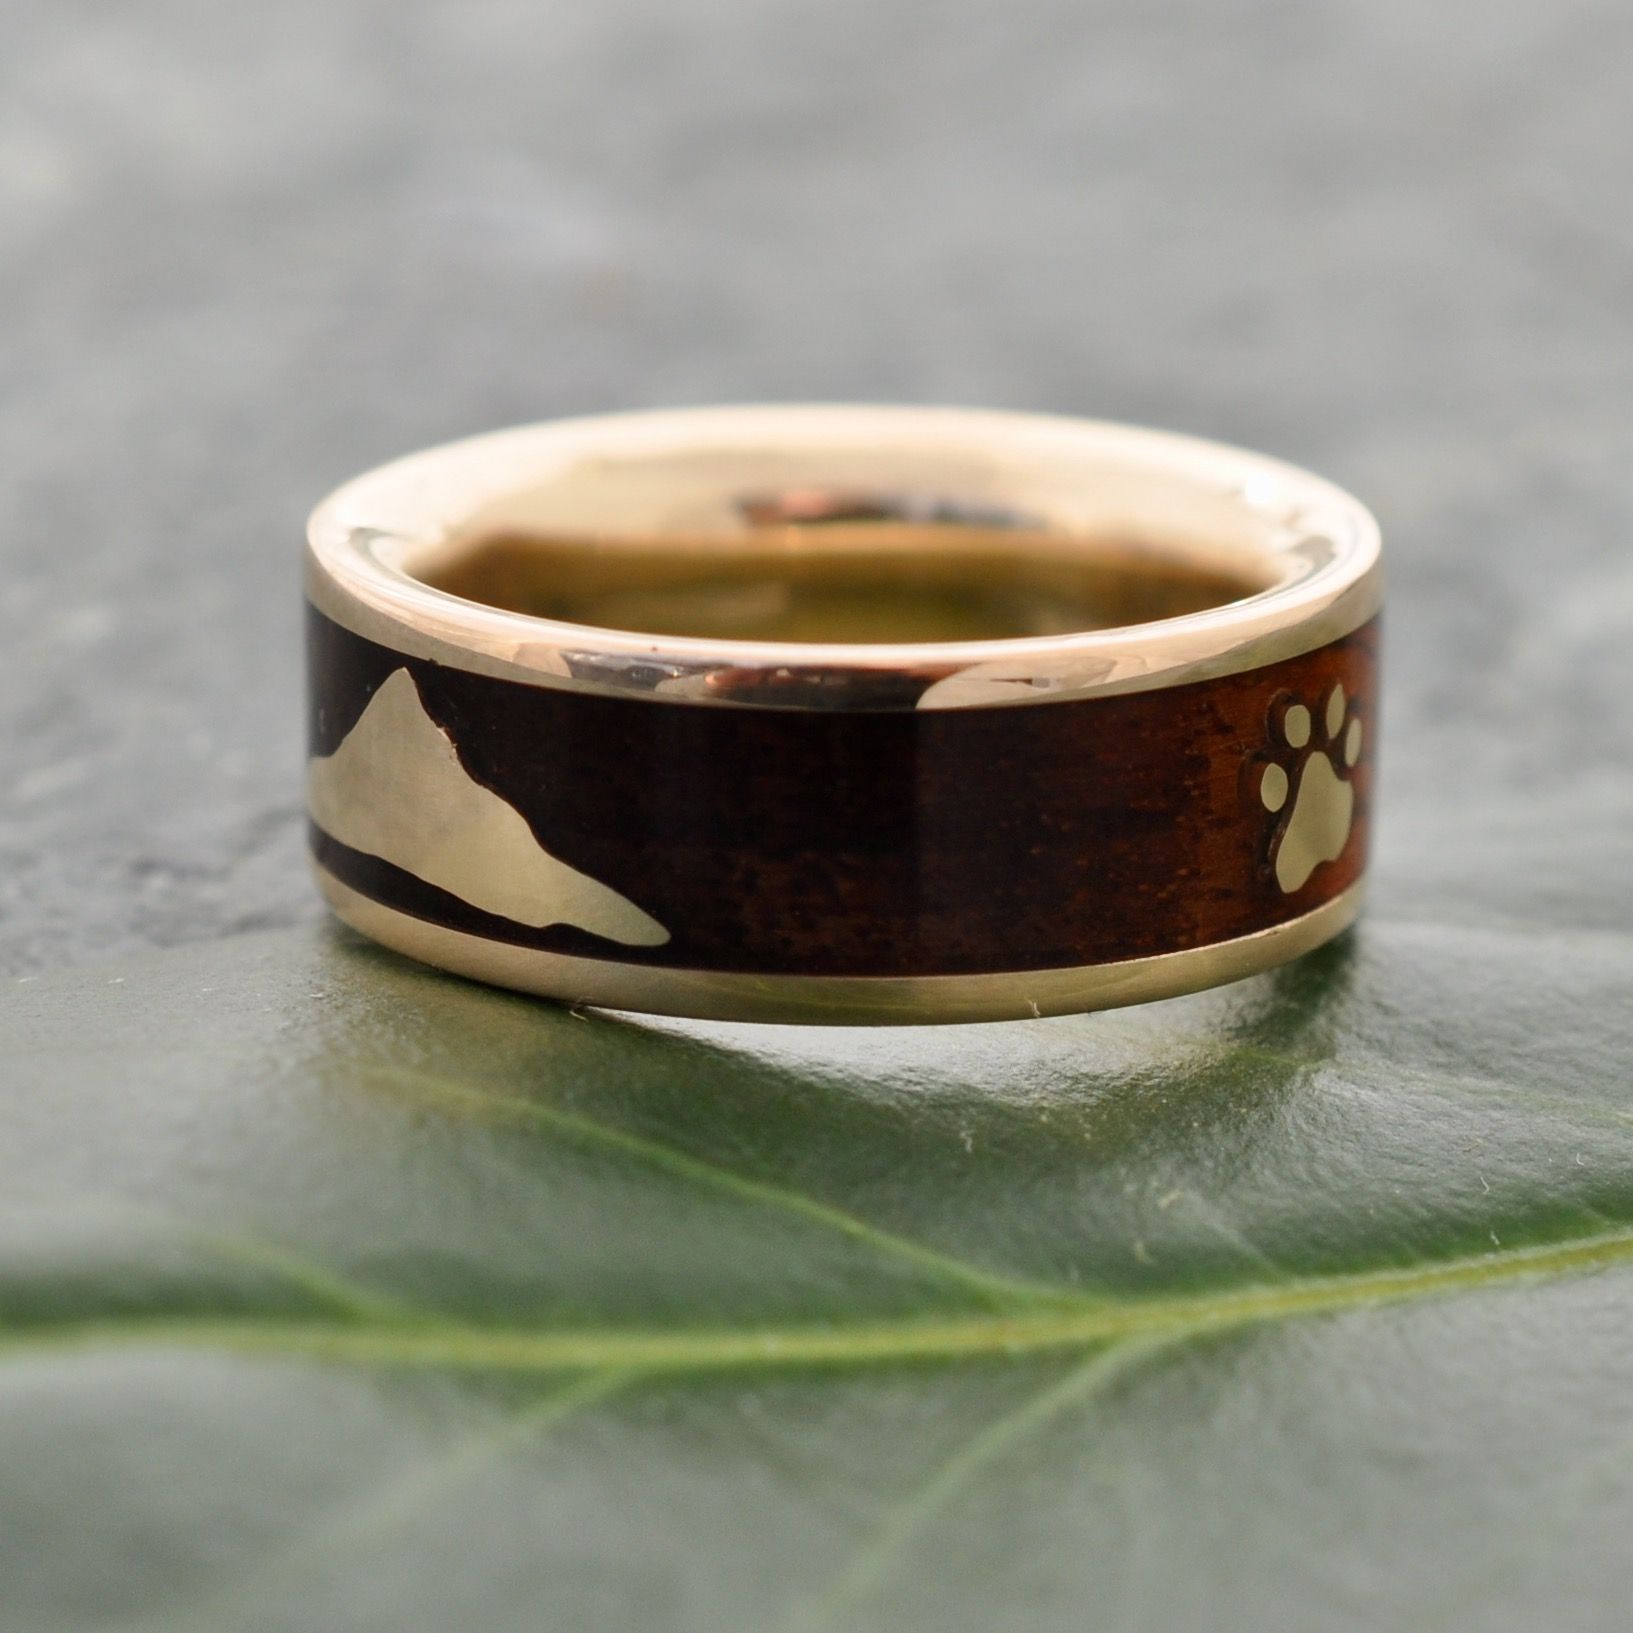 Maxi wooden ring made whit vintage recycled measuring tape customizable made to order